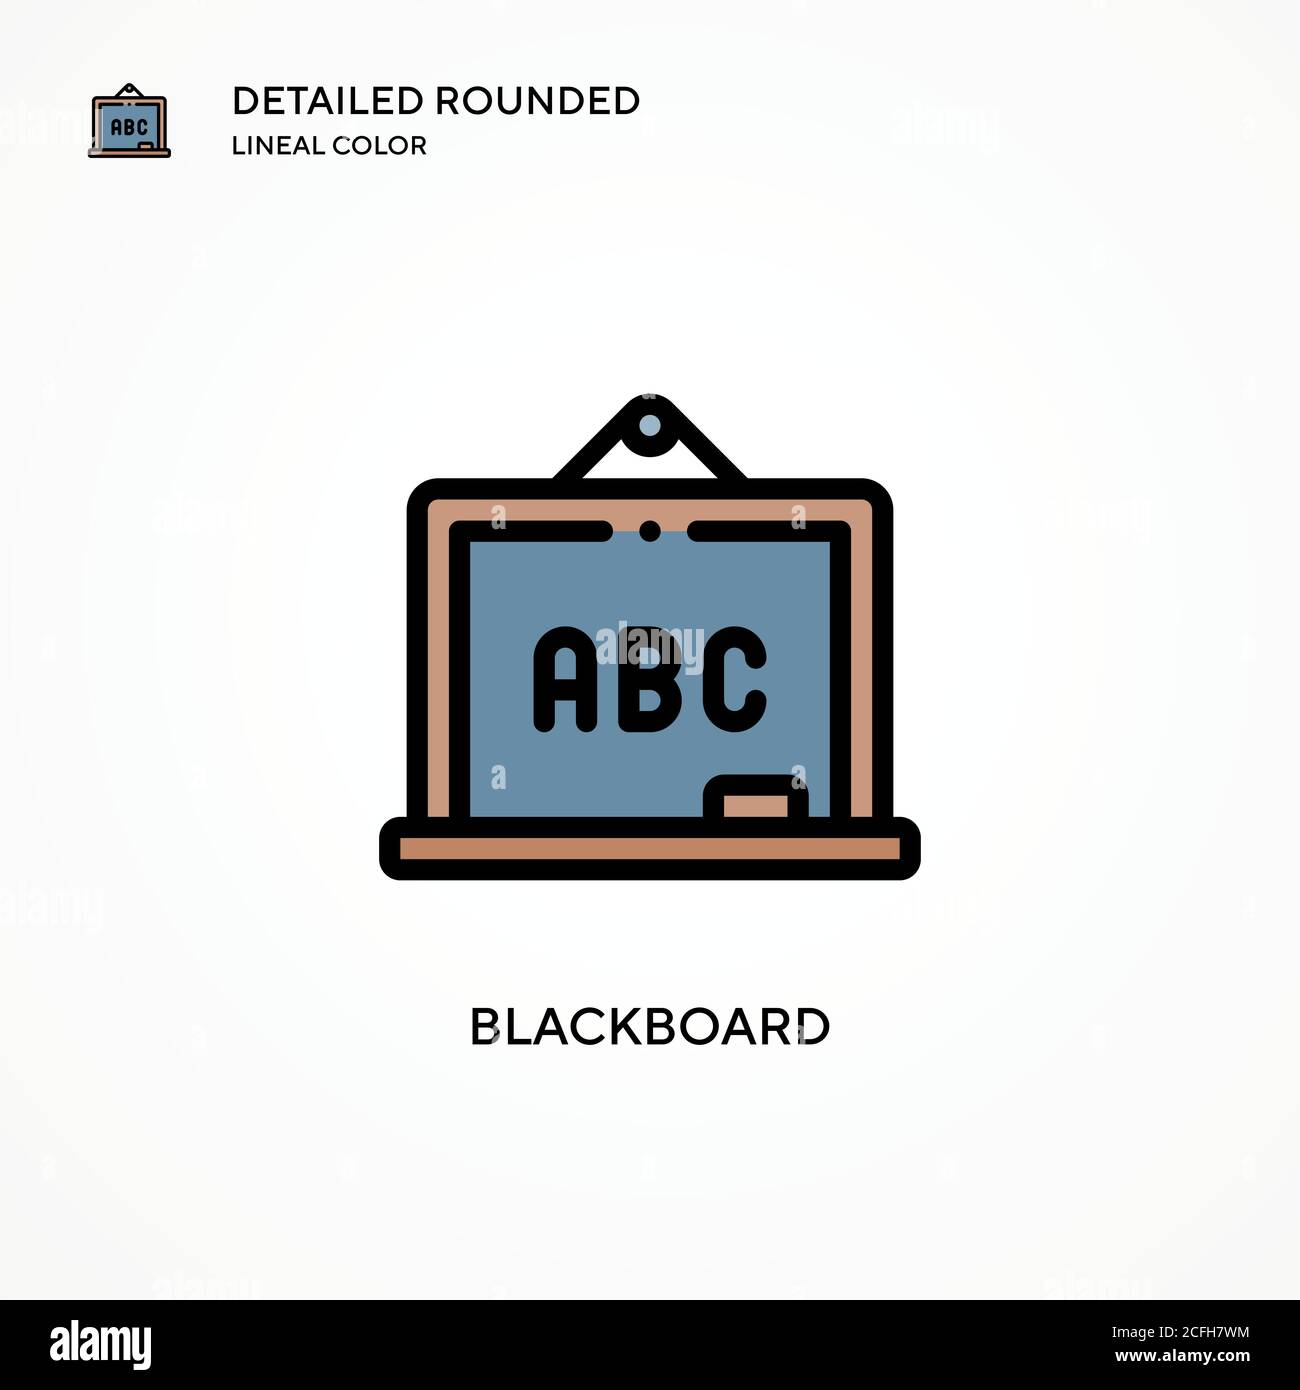 Blackboard vector icon. Modern vector illustration concepts. Easy to edit and customize. Stock Vector